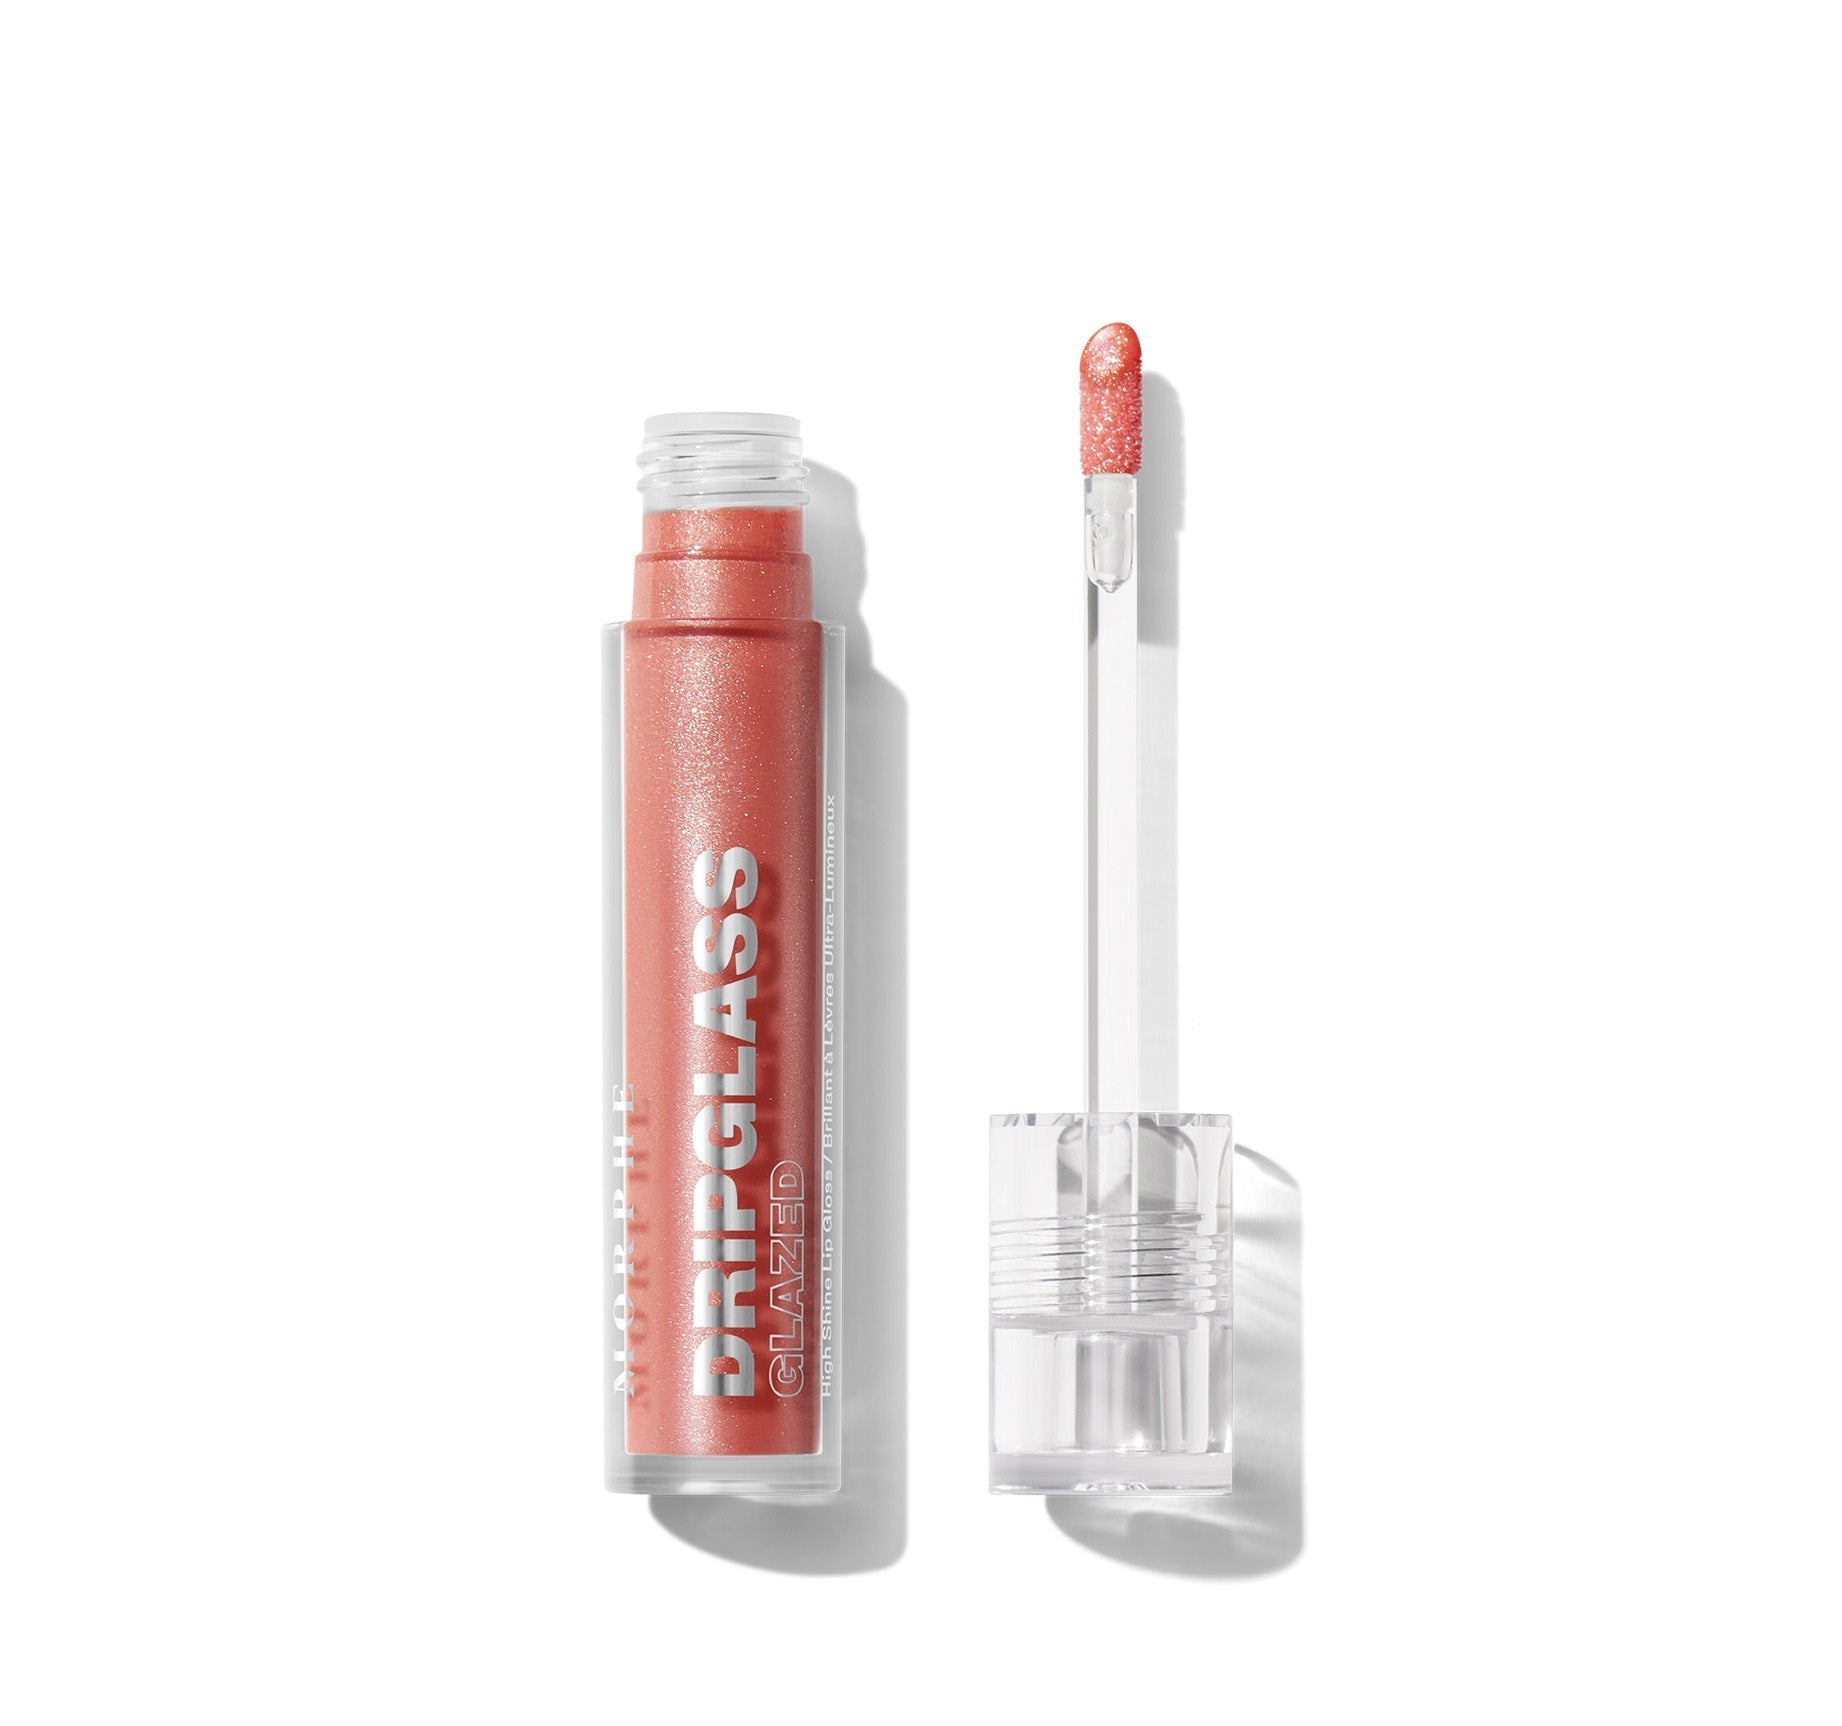 Aurascape Dripglass Glazed Highshine Pearlized Lip Gloss - Cosmic Coral - Image 1